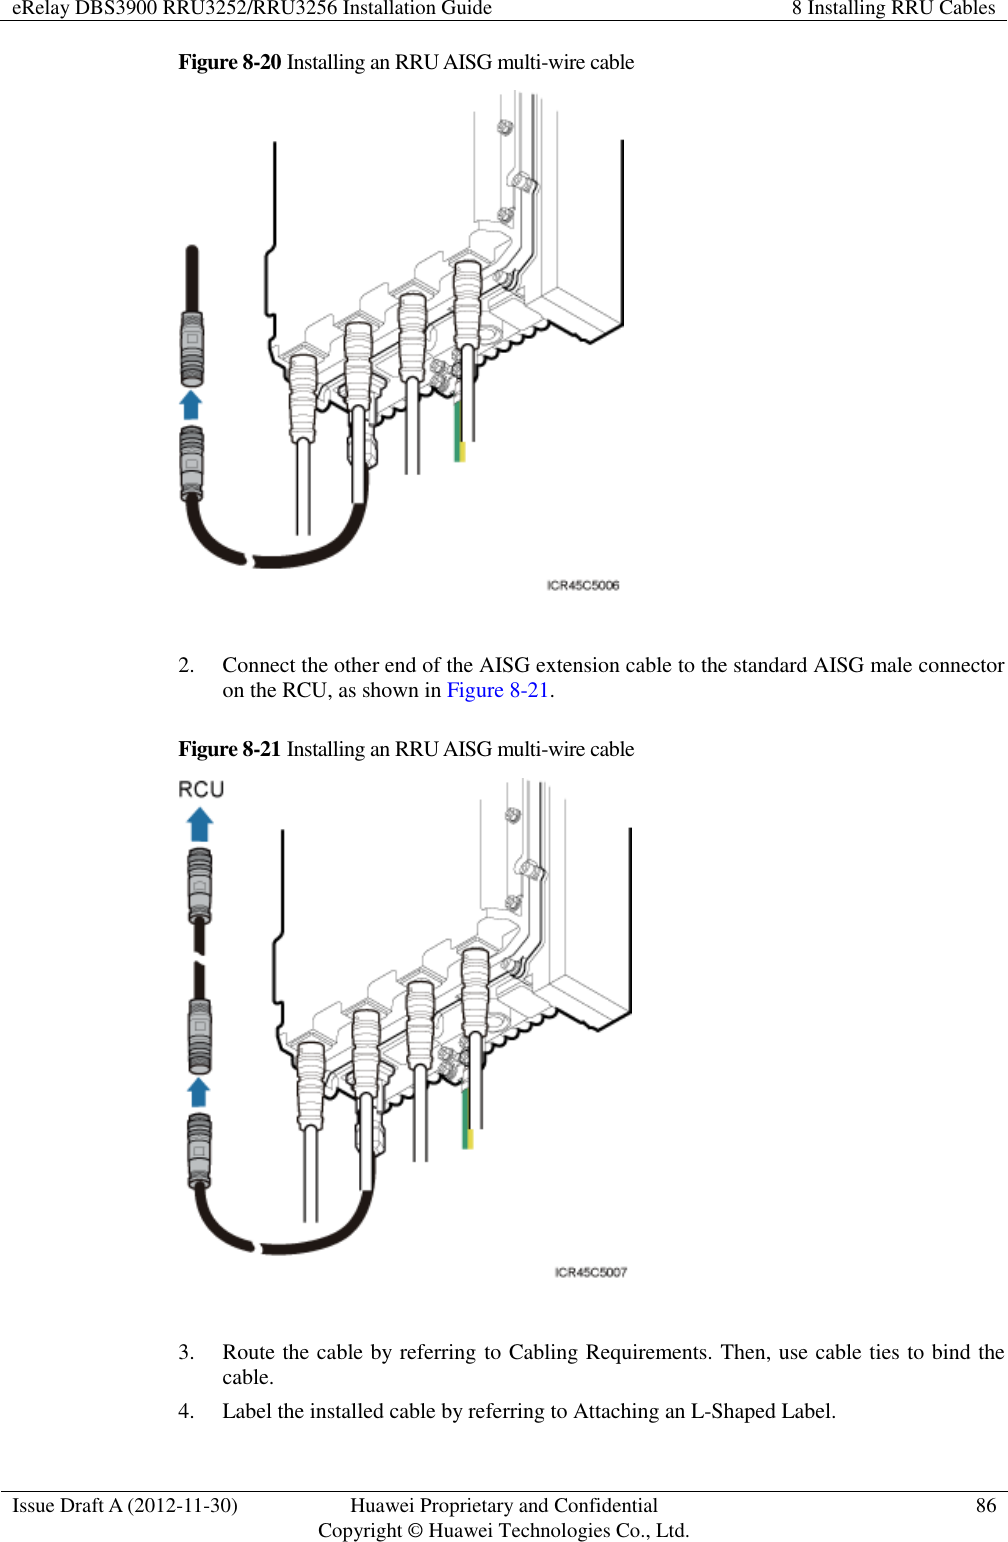 eRelay DBS3900 RRU3252/RRU3256 Installation Guide 8 Installing RRU Cables  Issue Draft A (2012-11-30) Huawei Proprietary and Confidential                                     Copyright © Huawei Technologies Co., Ltd. 86  Figure 8-20 Installing an RRU AISG multi-wire cable   2. Connect the other end of the AISG extension cable to the standard AISG male connector on the RCU, as shown in Figure 8-21. Figure 8-21 Installing an RRU AISG multi-wire cable   3. Route the cable by referring to Cabling Requirements. Then, use cable ties to bind the cable. 4. Label the installed cable by referring to Attaching an L-Shaped Label. 